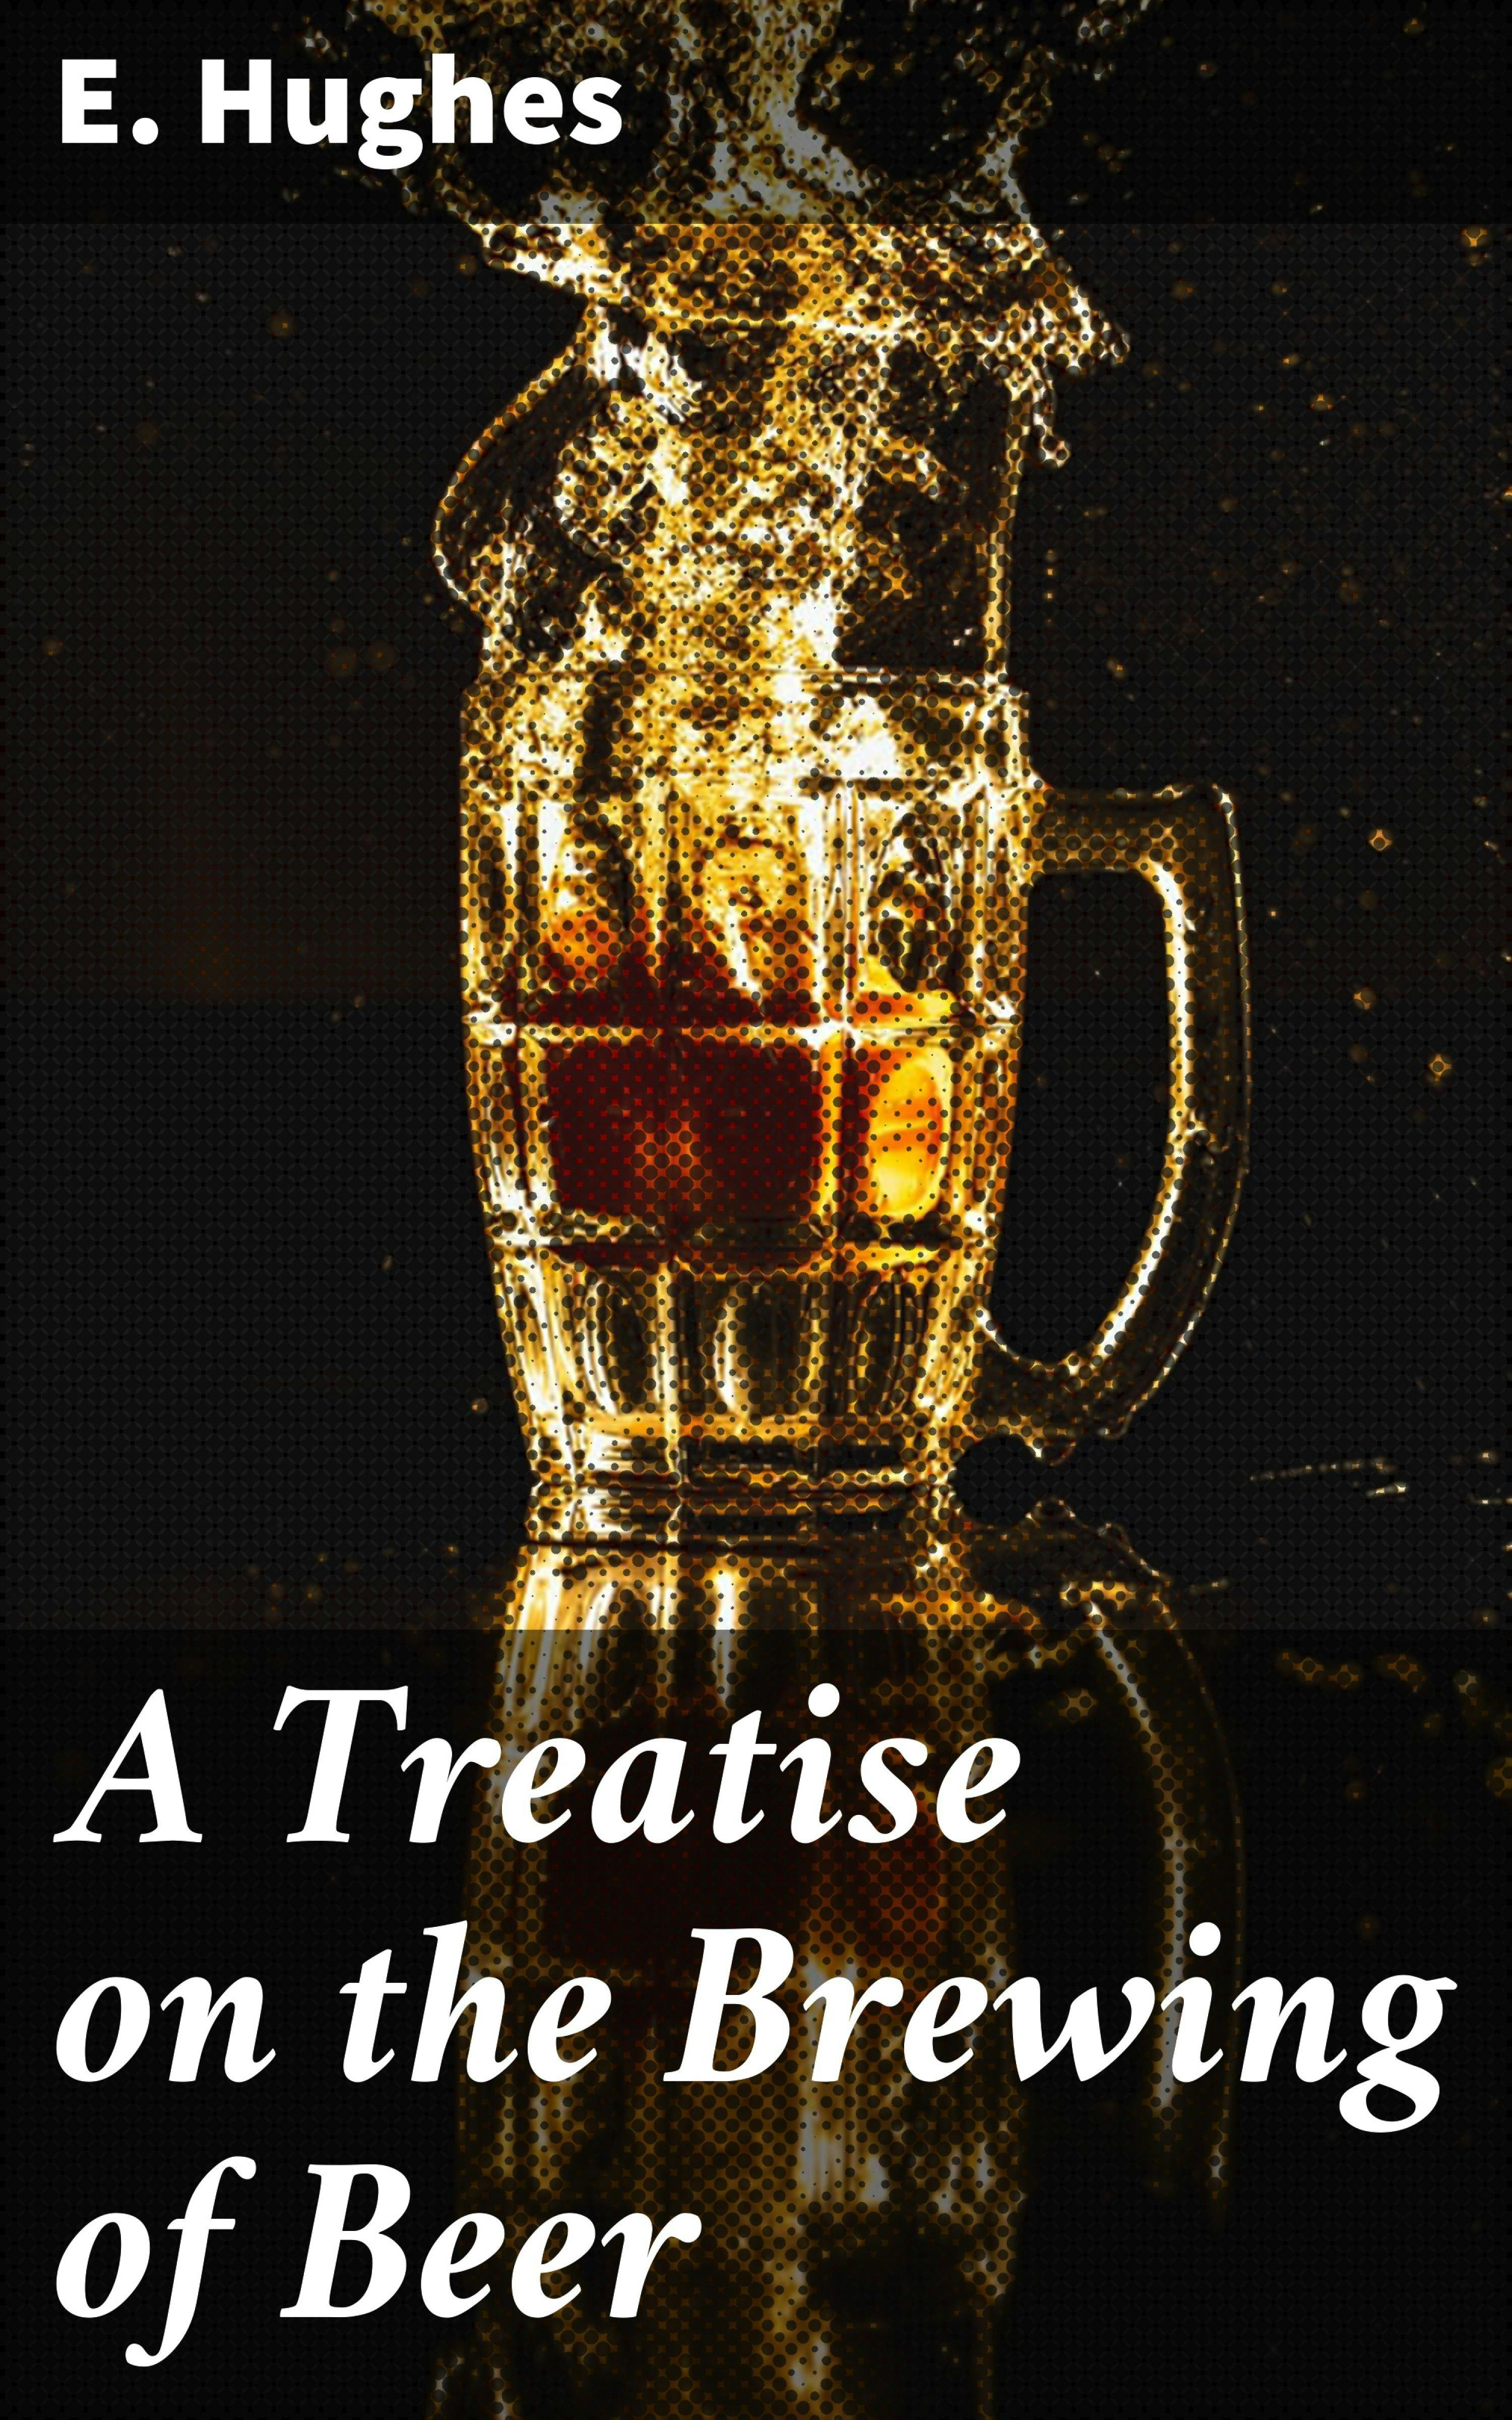 A Treatise on the Brewing of Beer - E. Hughes